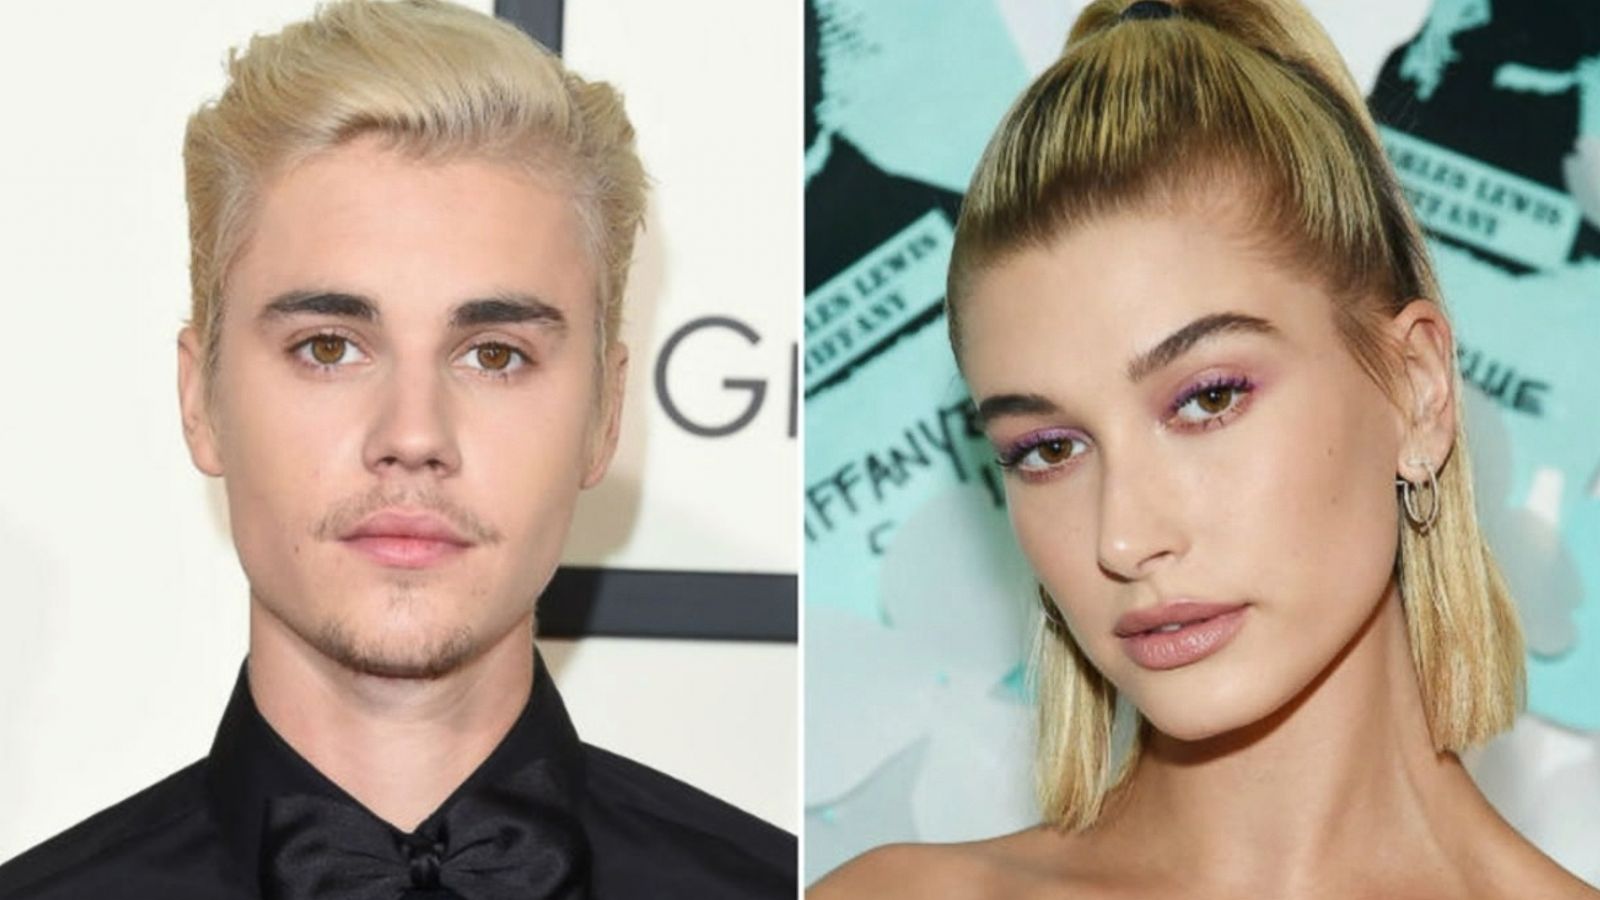 VIDEO: Unconfirmed reports drove the internet bananas on Sunday as rumors swirled that Justin Bieber and Hailey Baldwin were engaged.